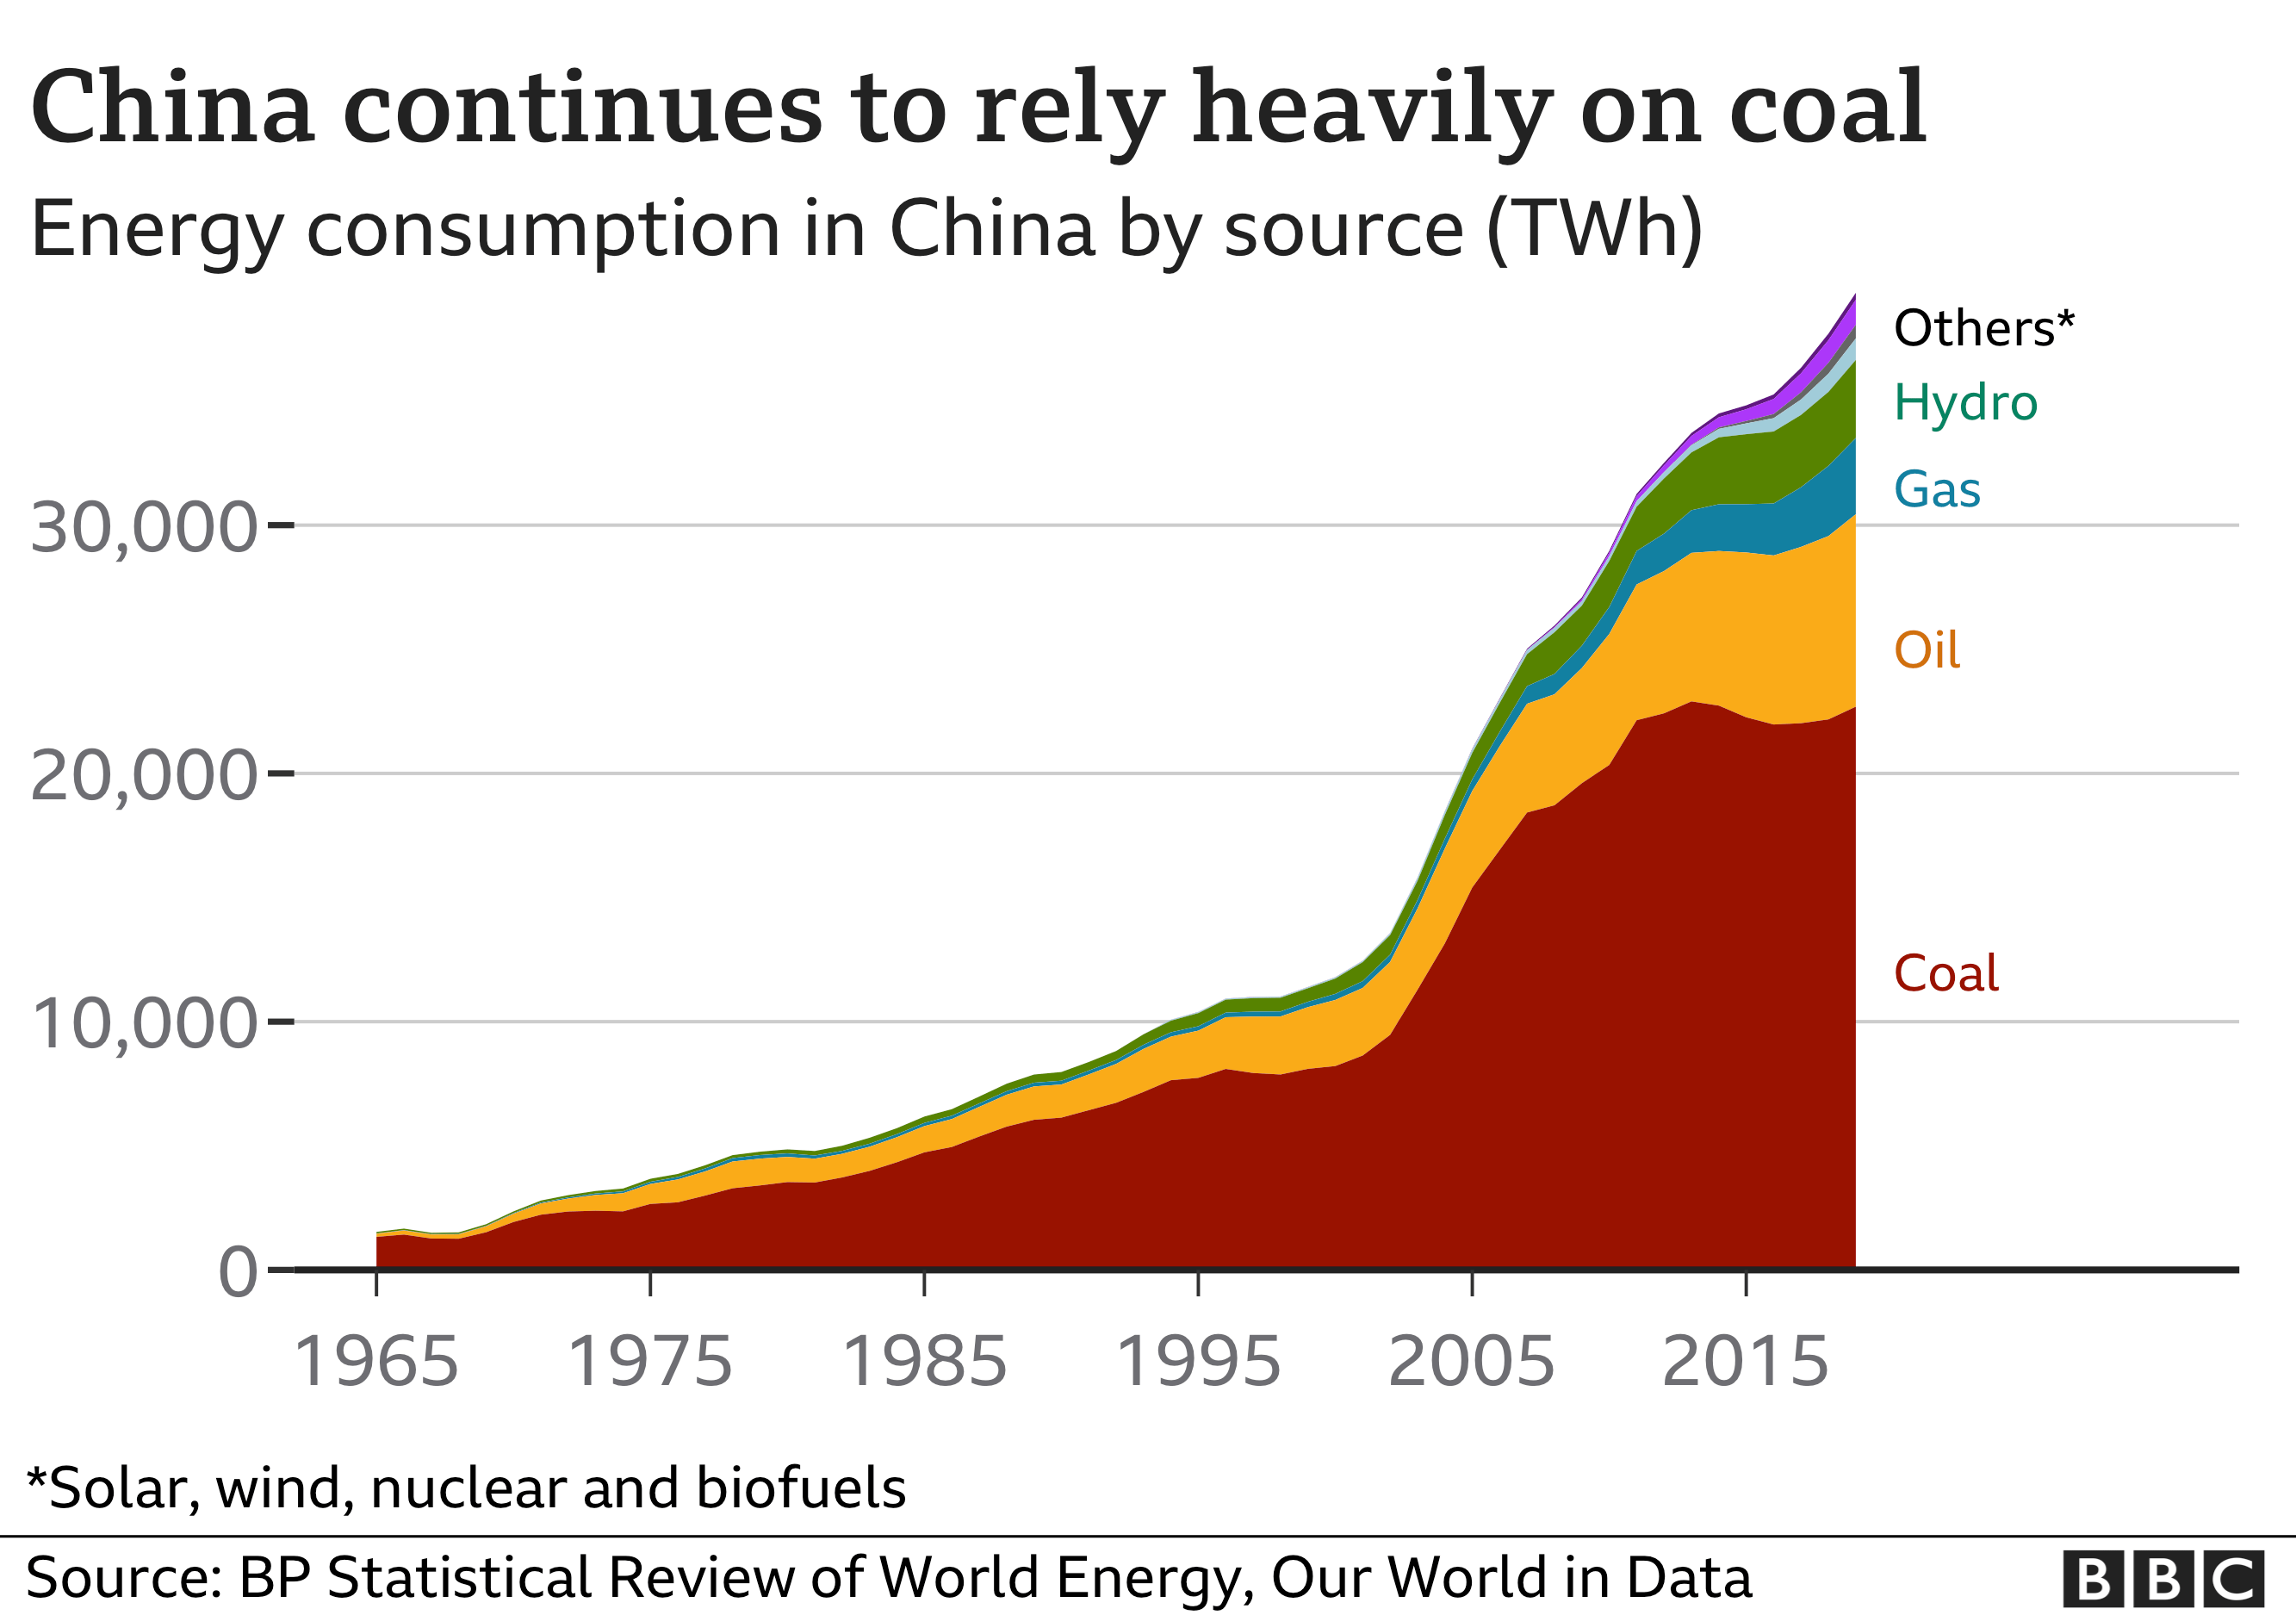 Graph showing China's dependence on coal